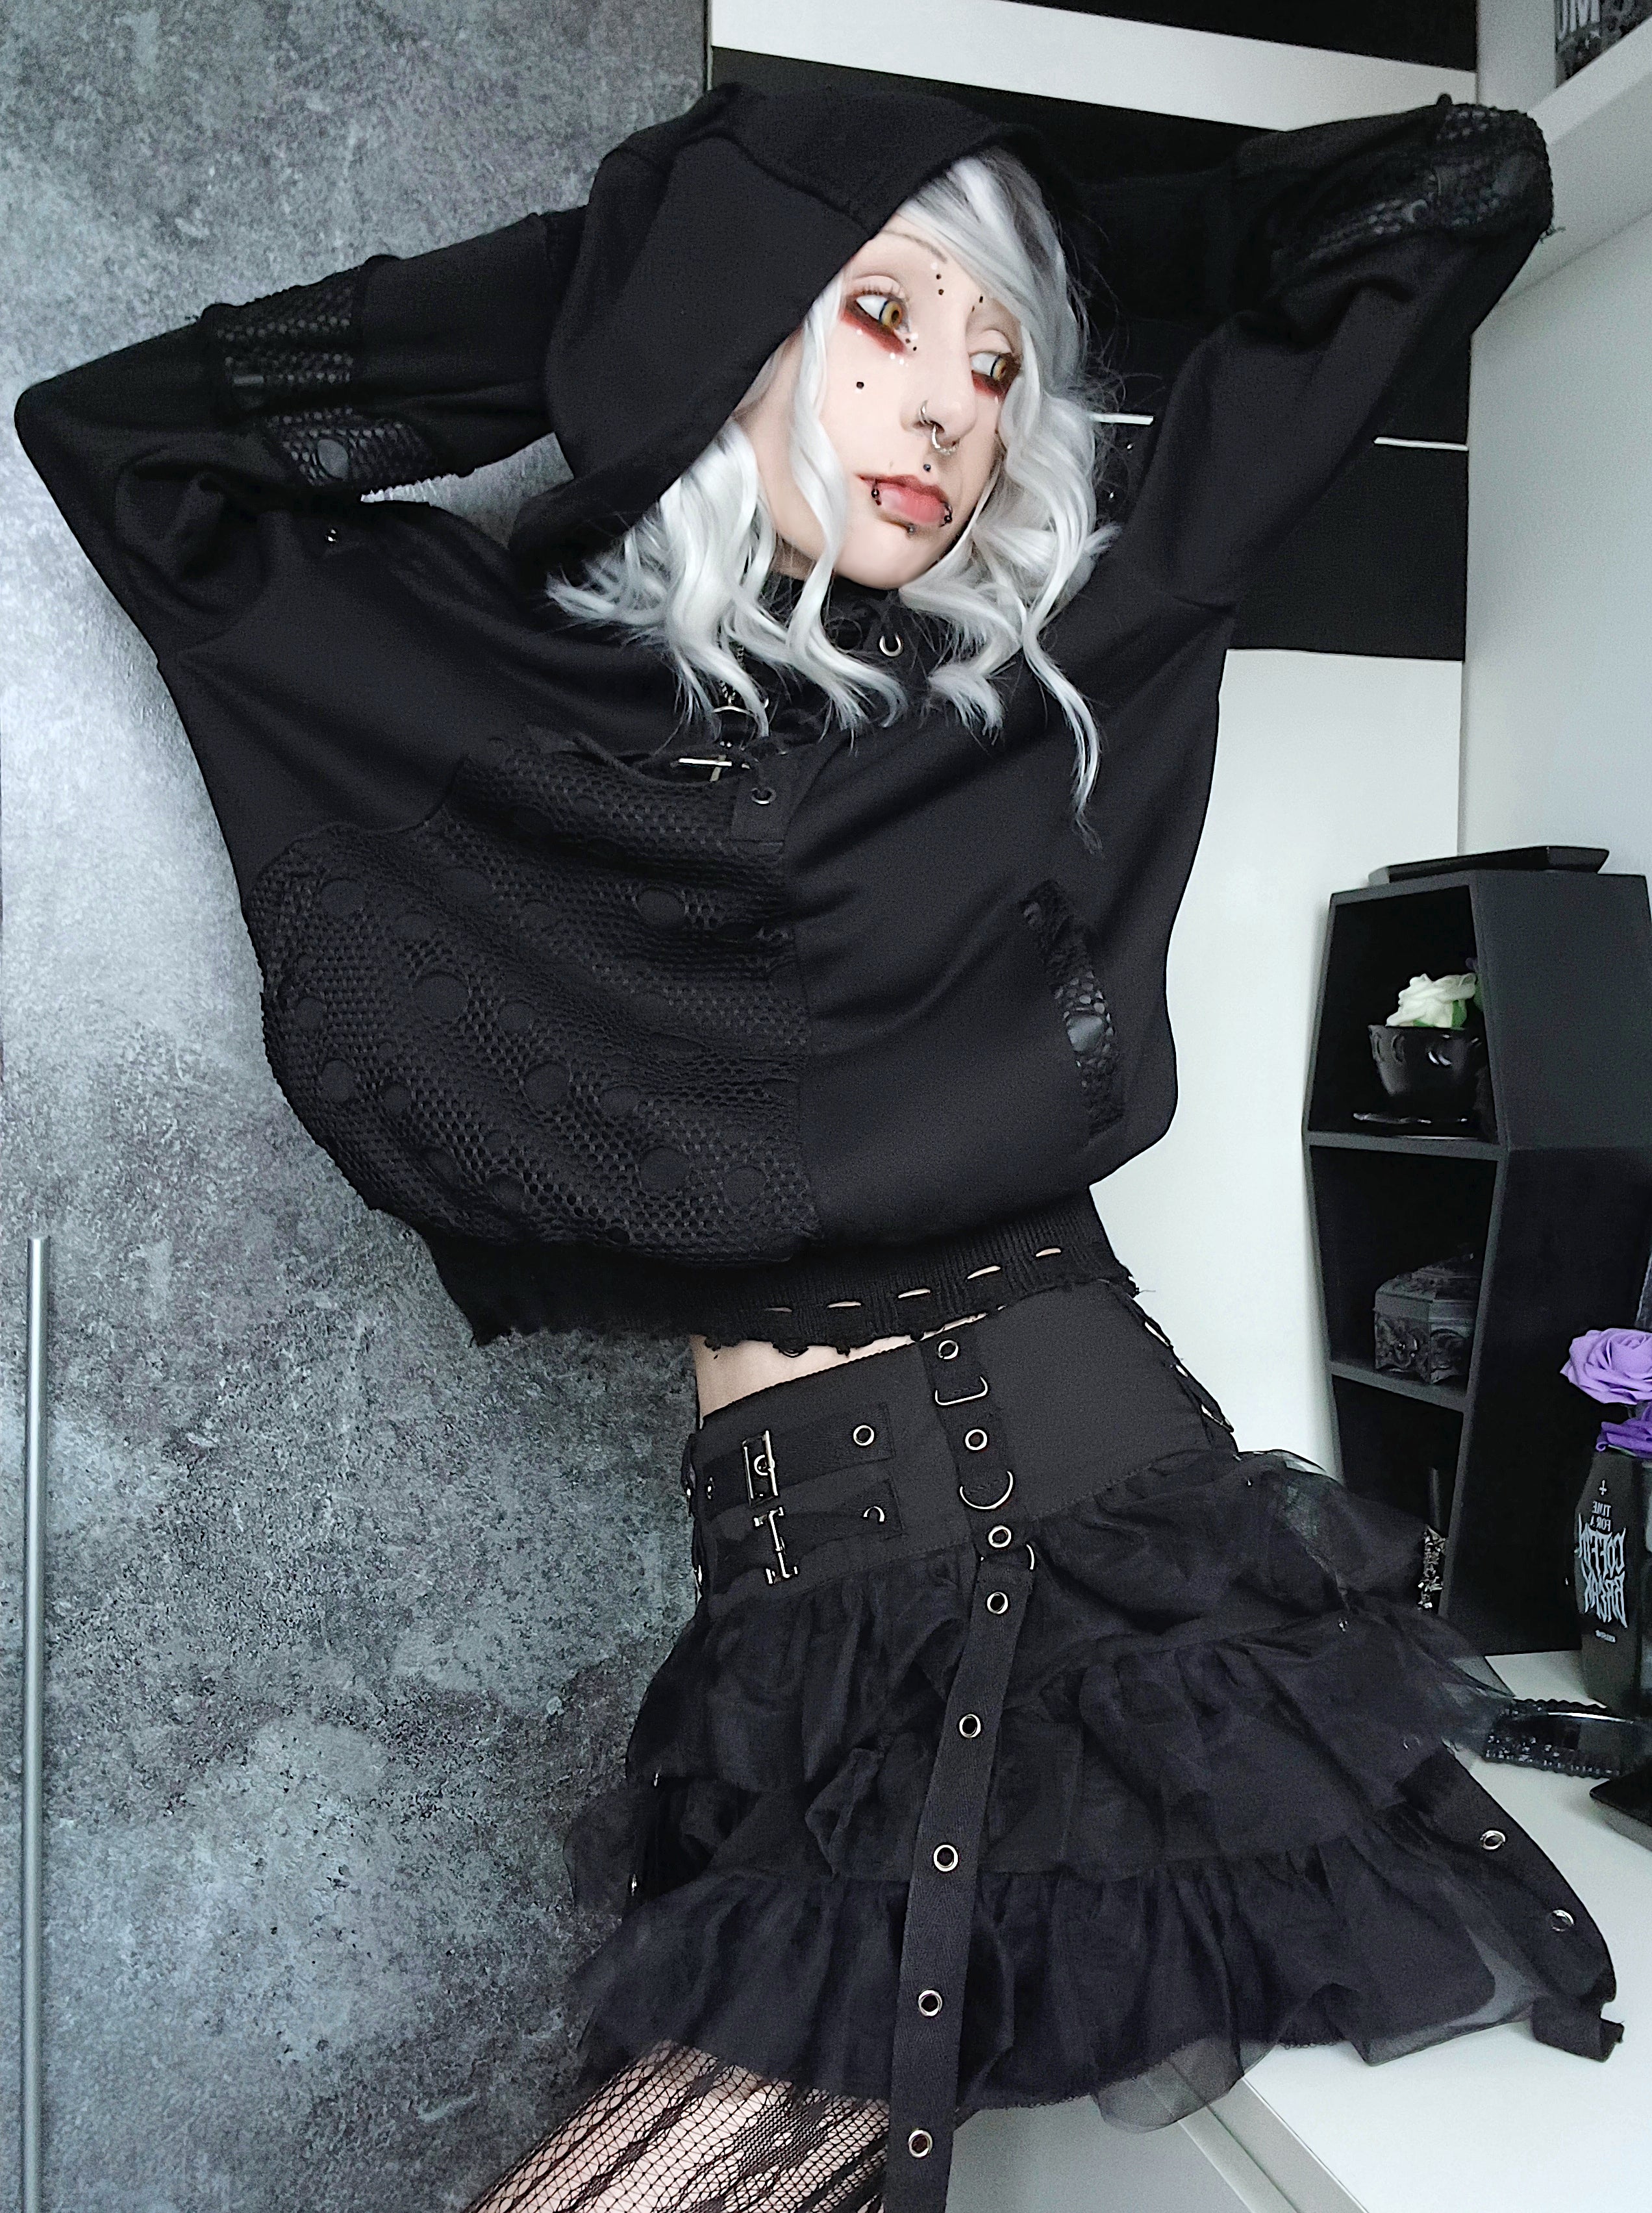 1-4

Felt cute 🥺💜
Rate this look 🖤

How was your Monday?
Mine was very busy ^^ I am no fan of Mondays

Outfit from @shasilo_clothing

#shasilo #shasiloswirl #alt#alternative #altmodel #altfashion #altgirl
#gothfashion #goth #gothic